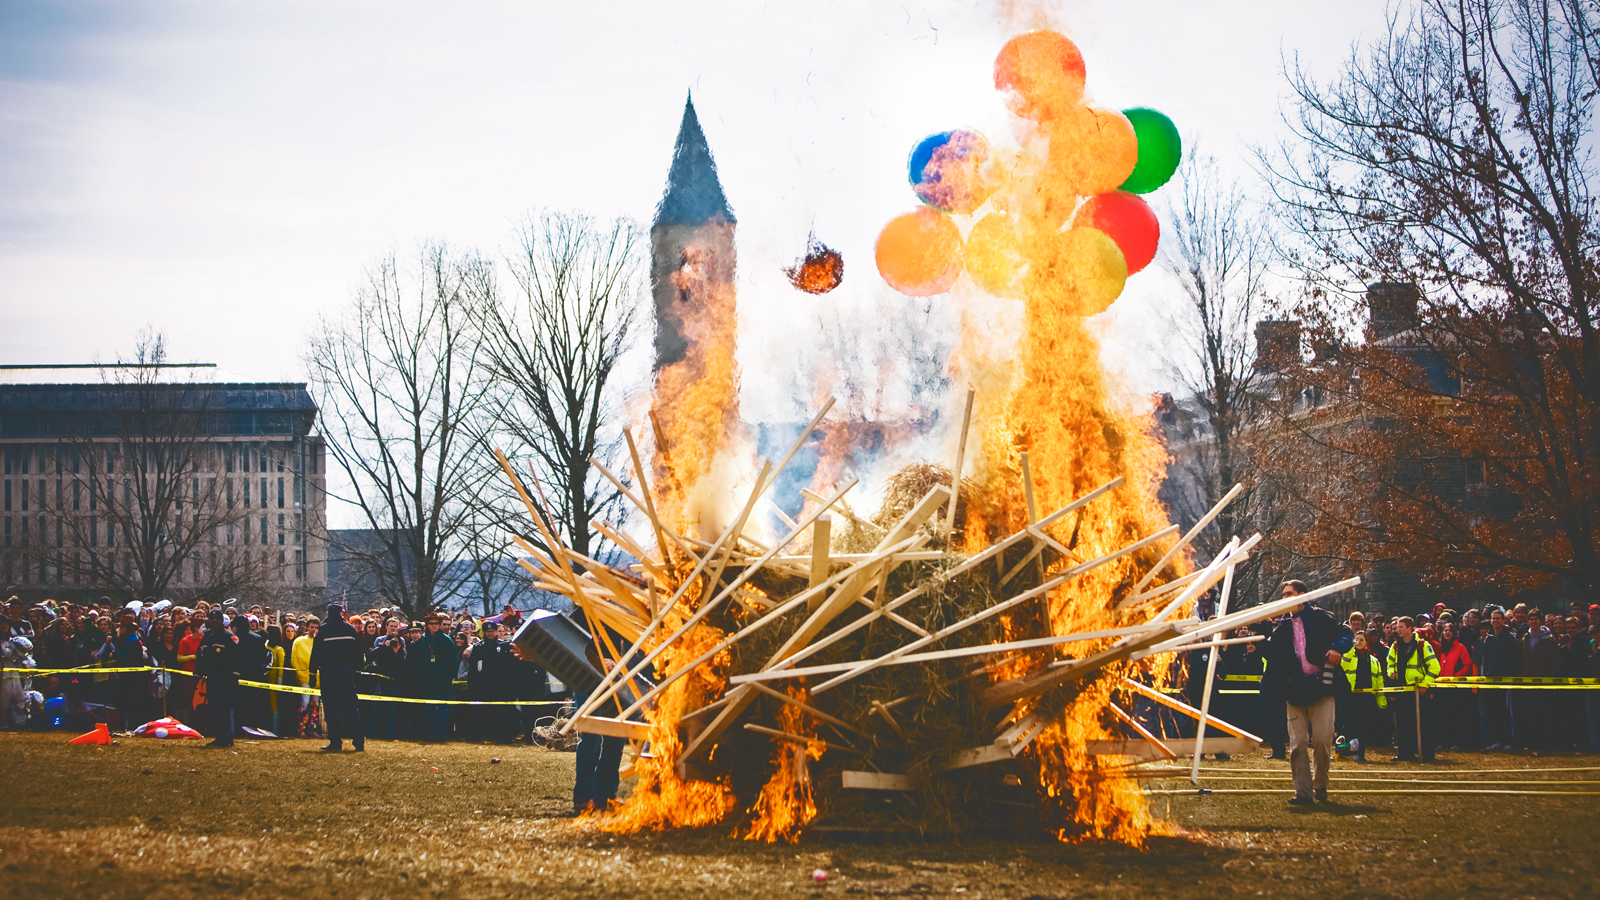 A model of a dragon’s egg is set ablaze on the Arts Quad in 2009